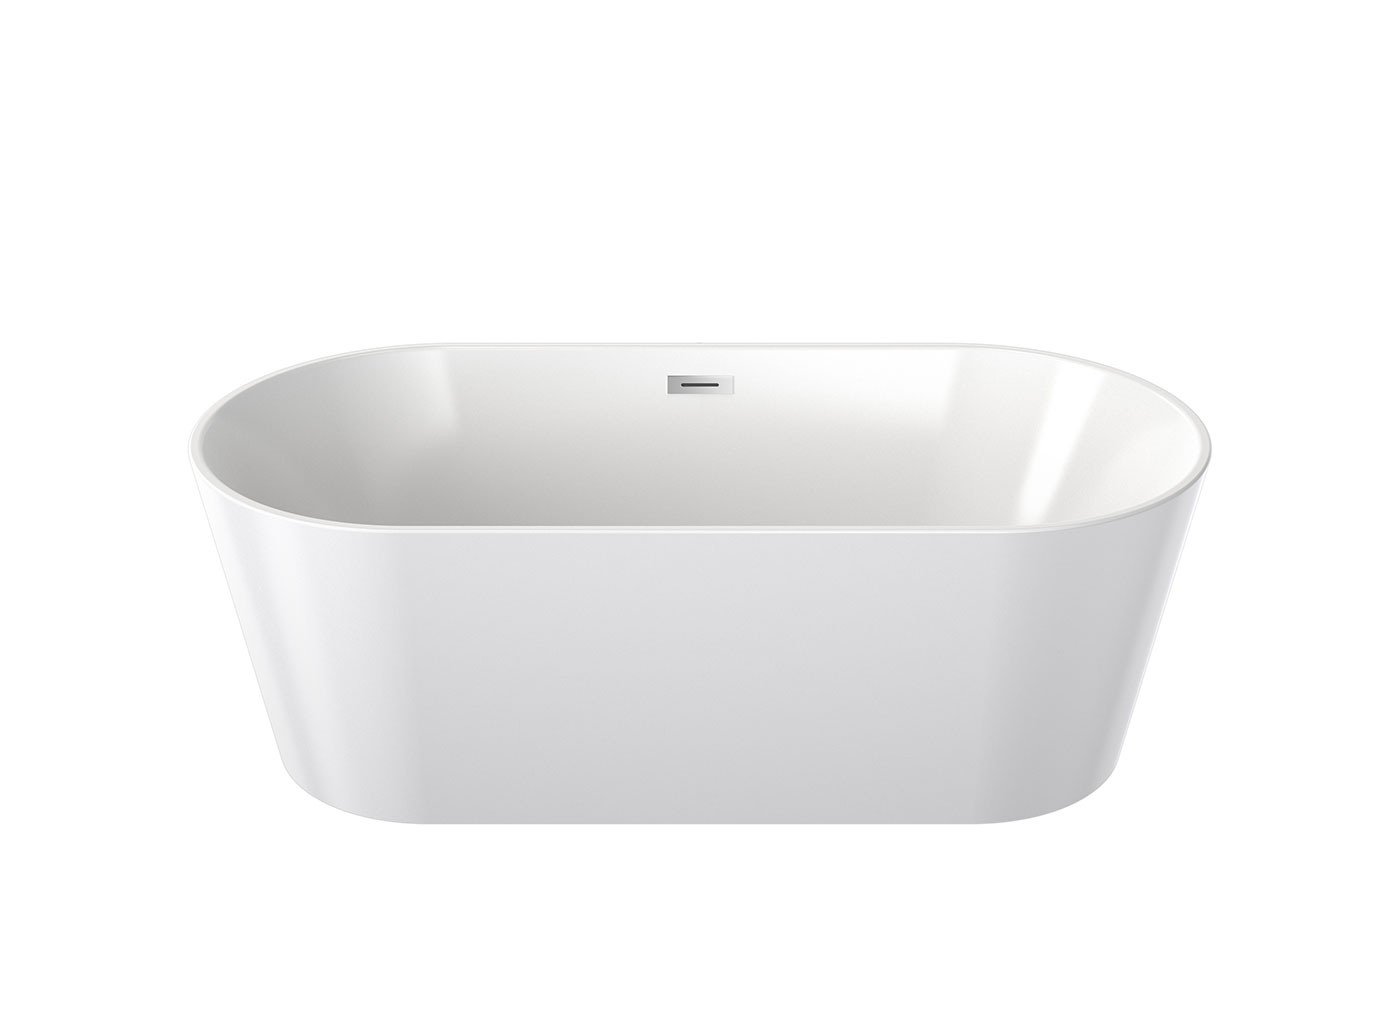 Trying to fit your grand designs into a small space? Clark's Freestanding bath range could fit right in!